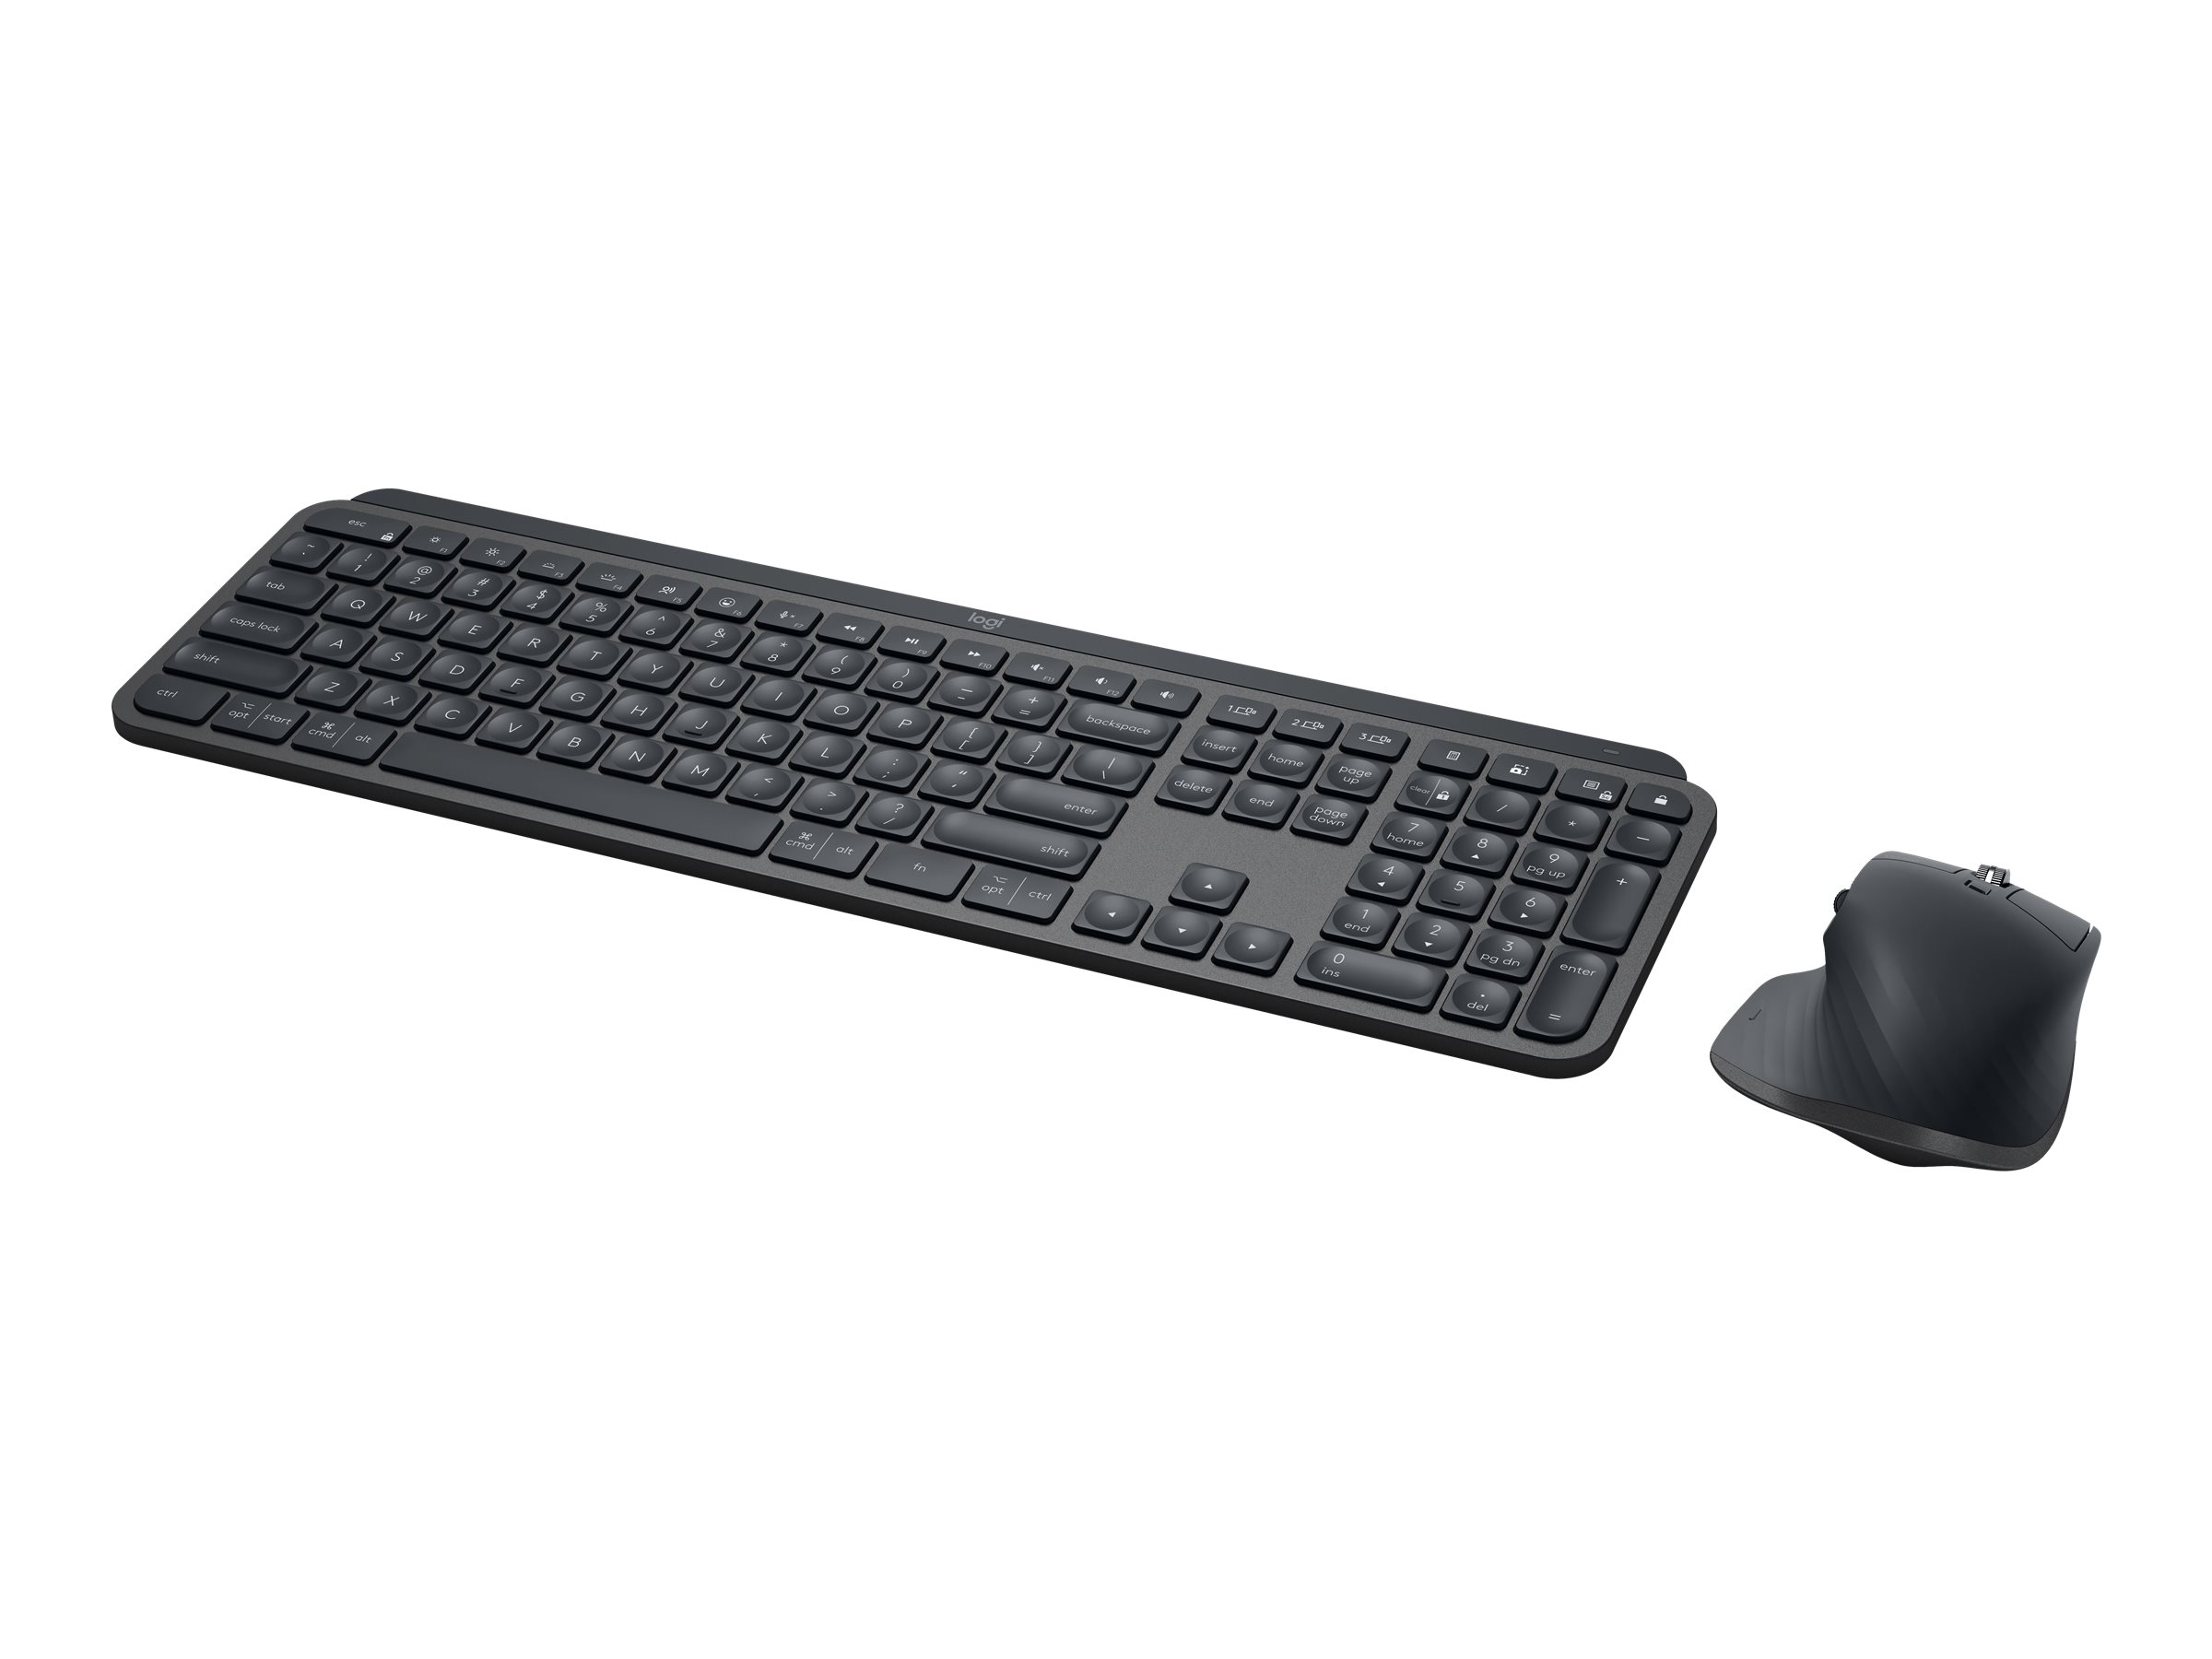  Logitech MX Keys Combo for Business  Gen 2, Full Size Wireless  Keyboard and Wireless Mouse, with Keyboard Palm Rest, Bluetooth, Logi Bolt,  Quiet Clicks, Windows/Mac/Chrome/Linux - Graphite : Electronics